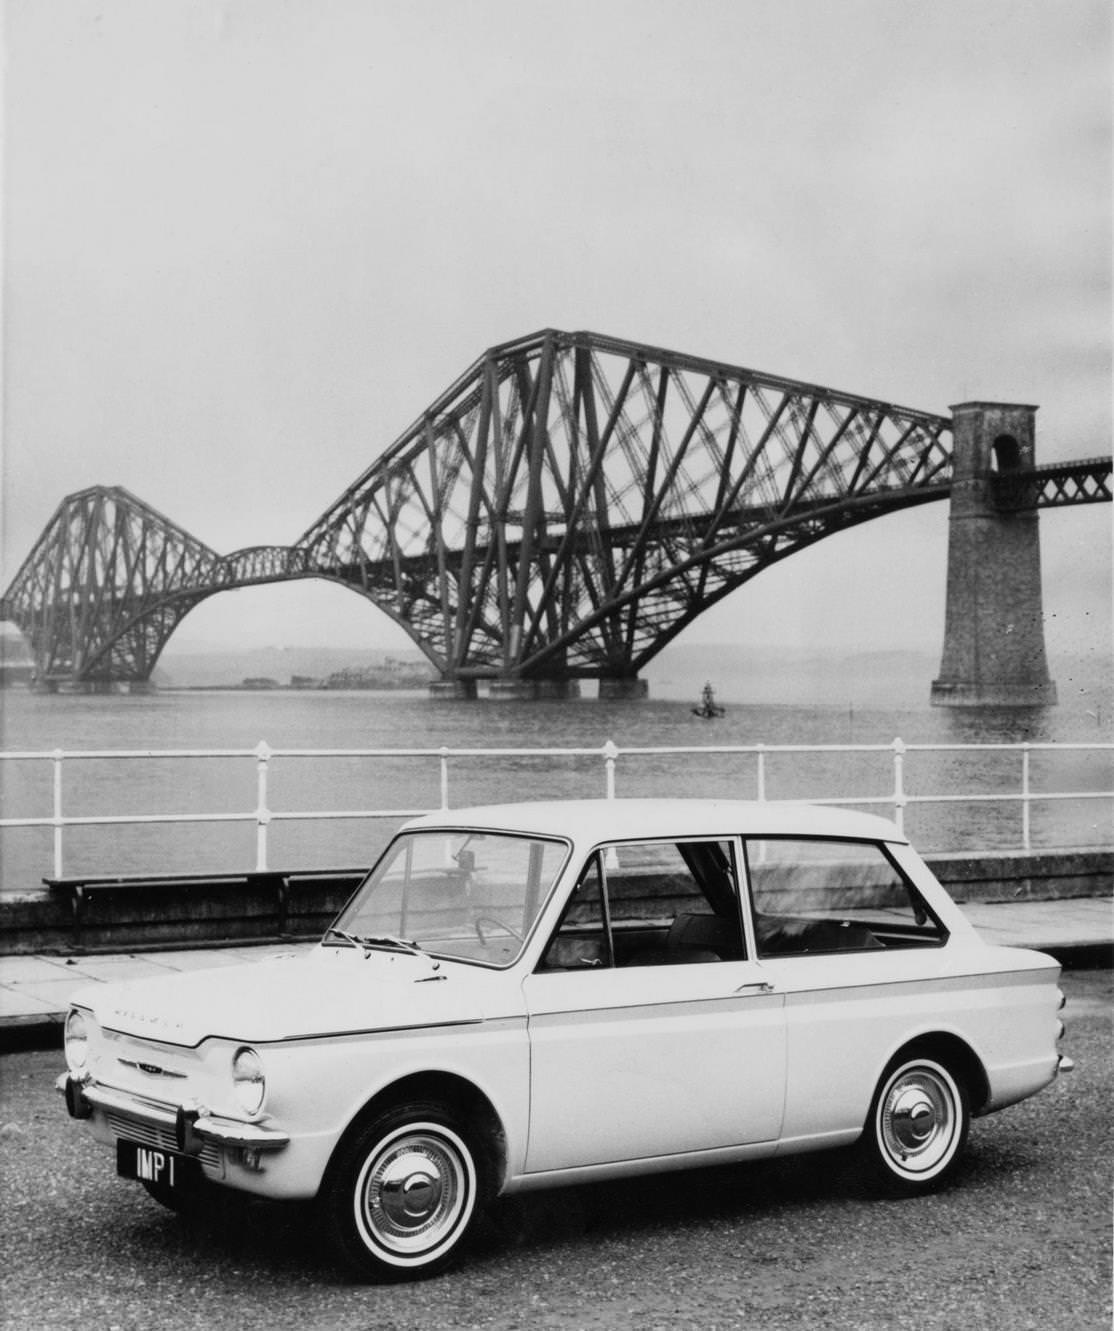 The Scottish built Rootes Group Hillman Imp compact, rear-engined saloon car seen near the Forth Bridge cantilever railway bridge across the Firth of Forth on 3 May 1963 near Edinburgh, Scotland.